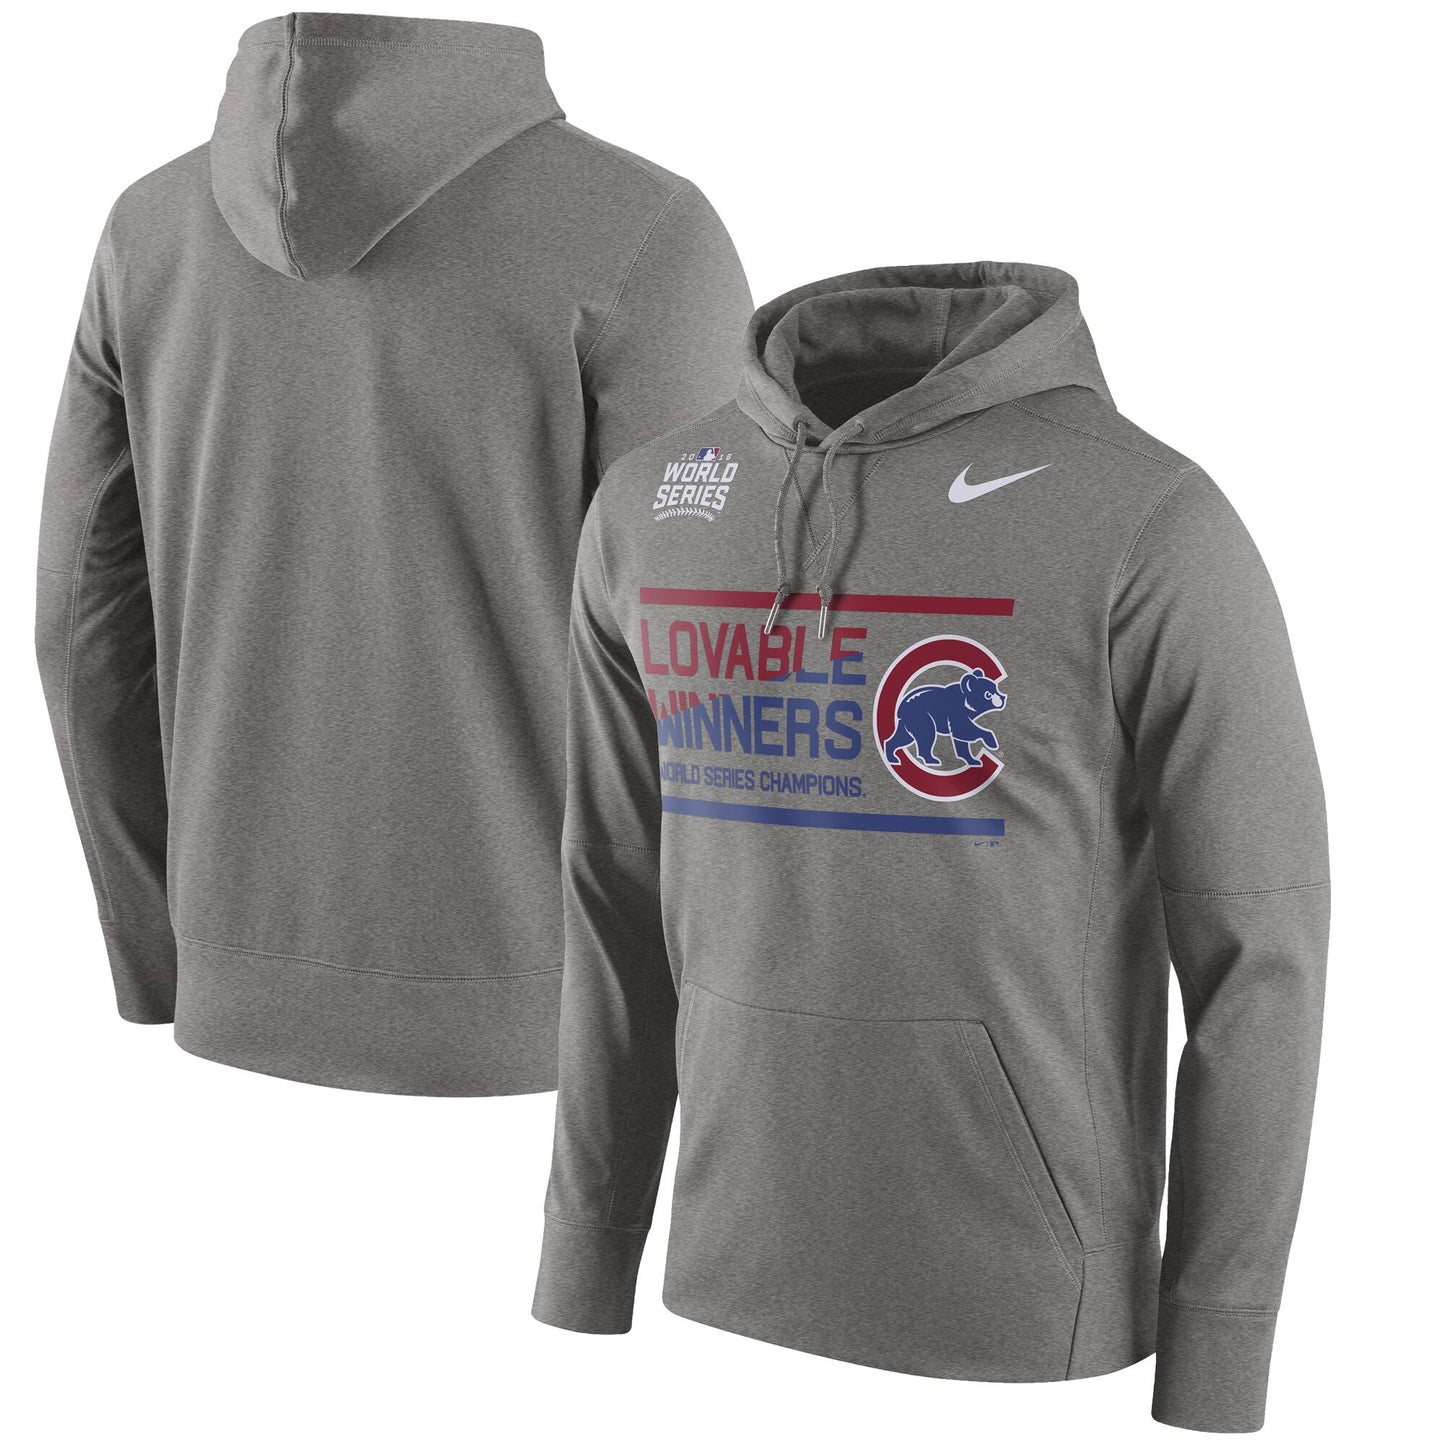 Men's Chicago Cubs Nike 2016 World Series Champions Lovable Winners Performance Pullover Hoodie